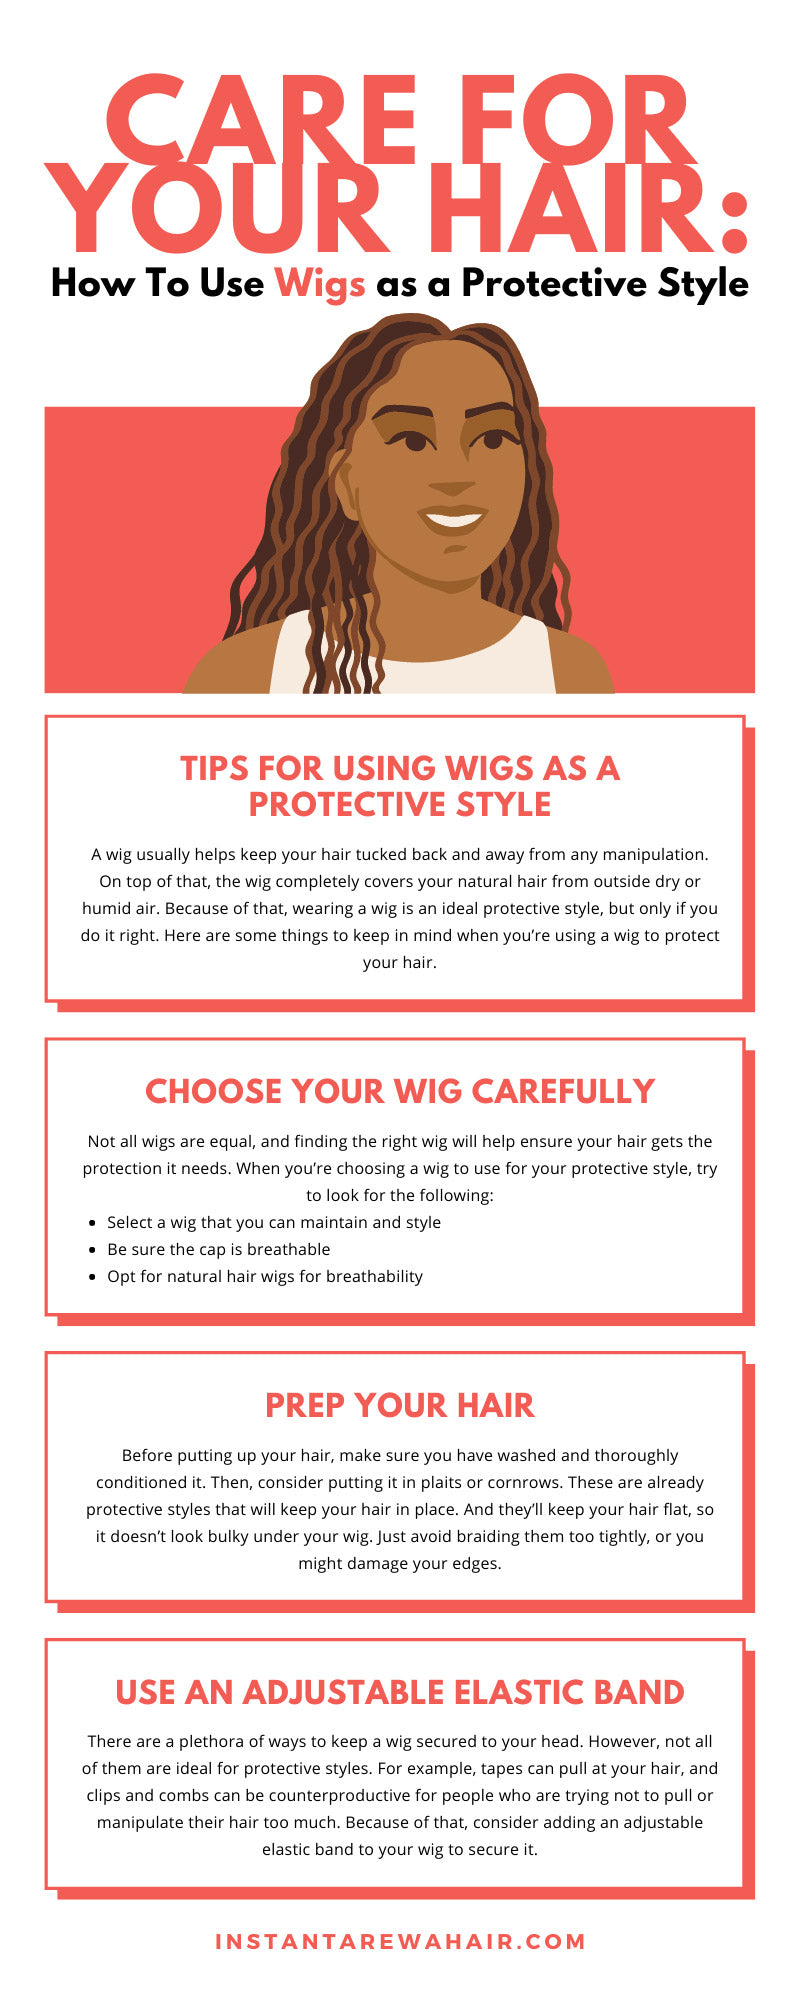 Wig Maintenance & Styling: What You Need to Know According to